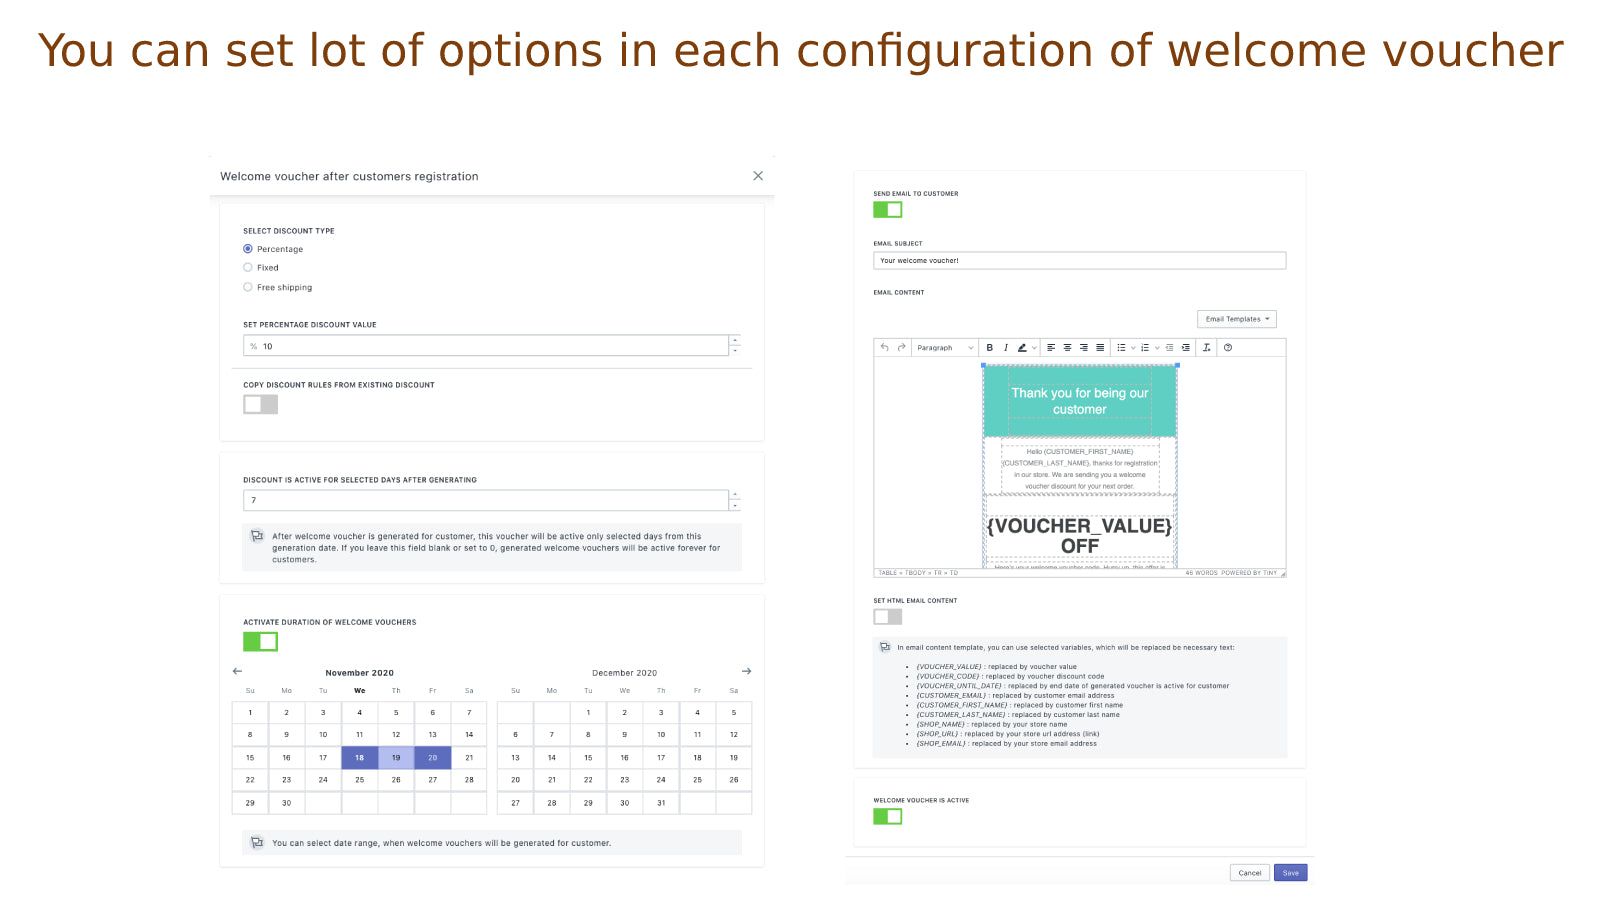 You can set lot of options in welcome vouchers configuration